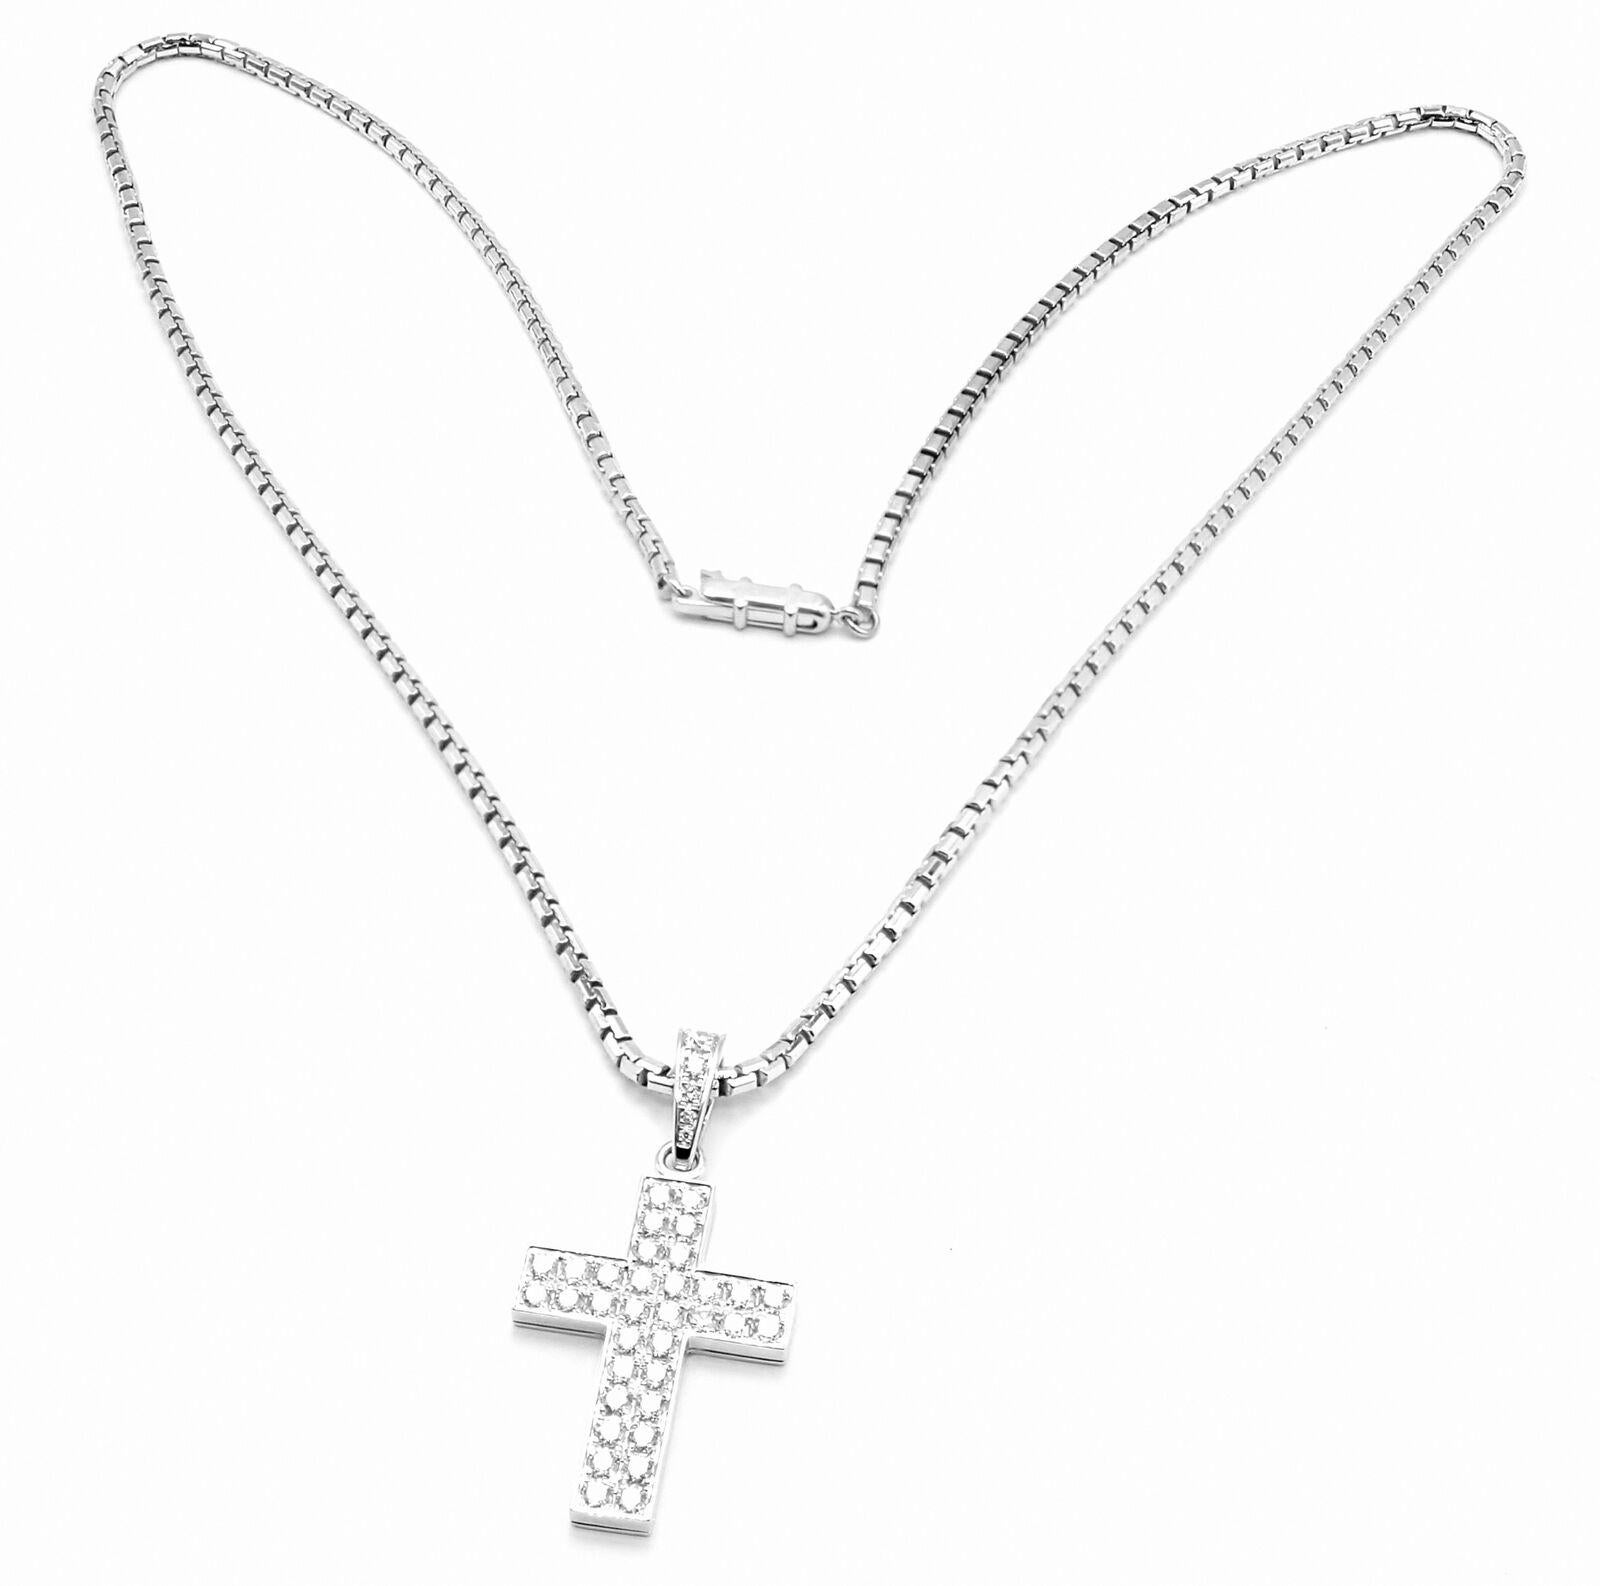 18k White Gold Diamond Cross Pendant Link Necklace by Cartier. 
With 42 round brilliant cut diamonds VVS1 clarity, E color total weight approximately 1.75ct
This necklace comes with service paper from Cartier store in NYC.
Details: 
Length: